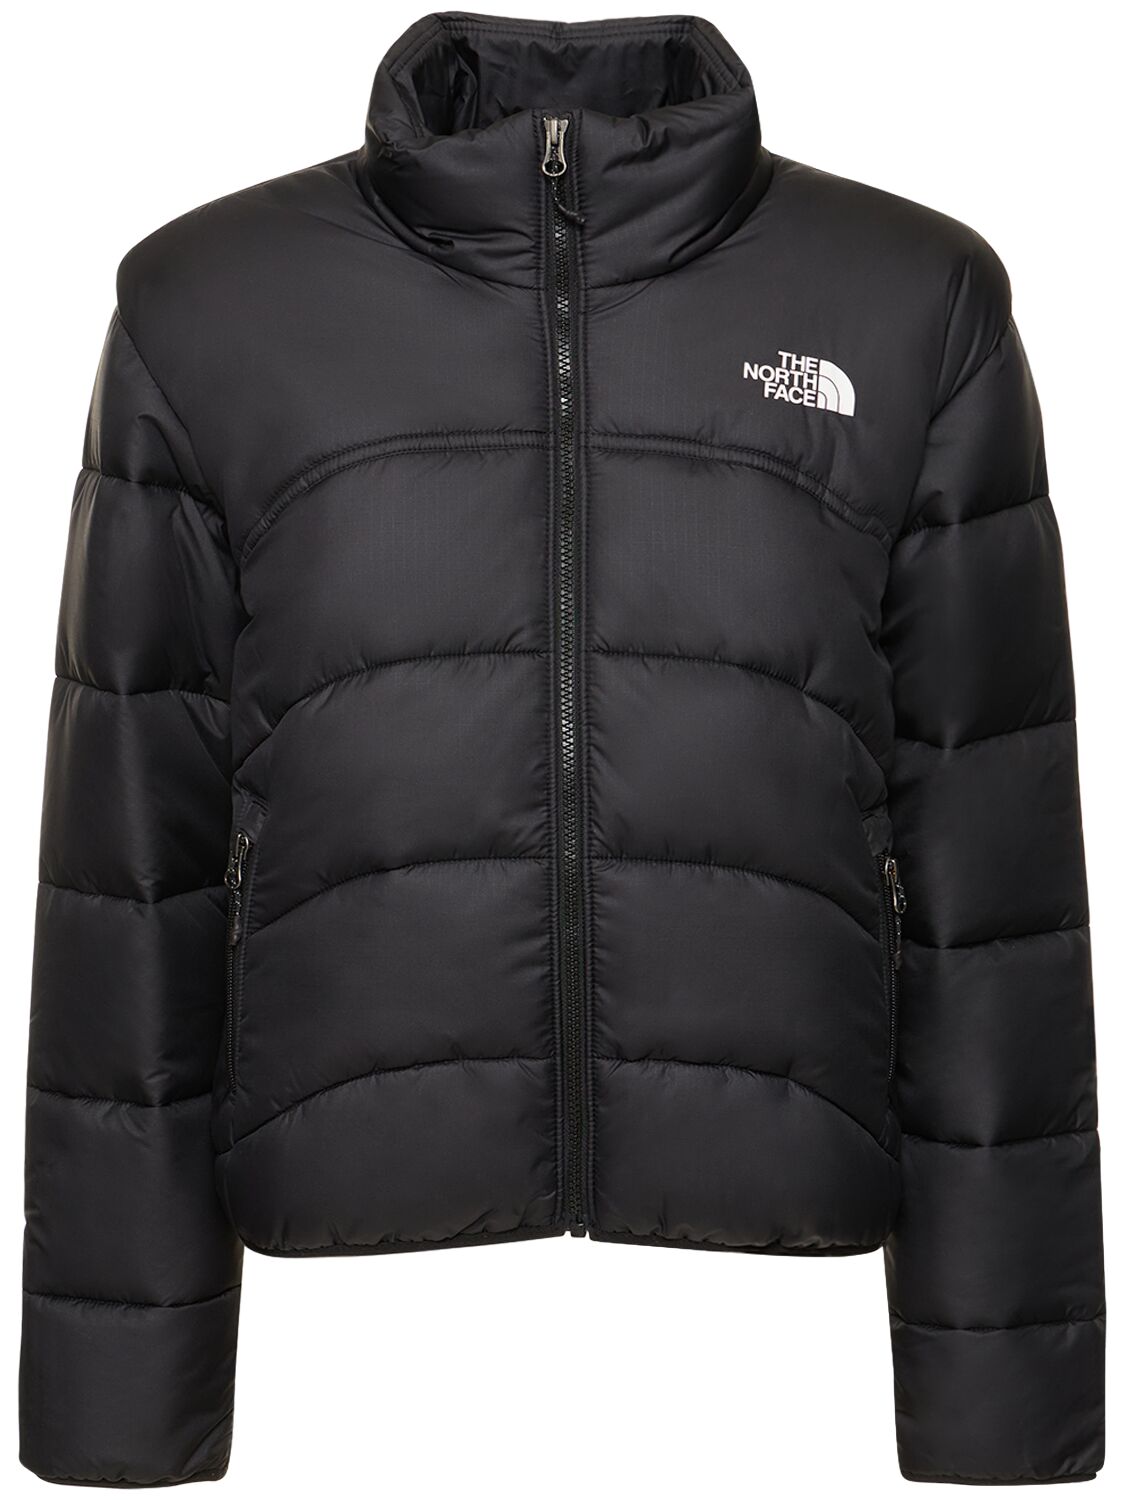 THE NORTH FACE TNF JACKET 2000